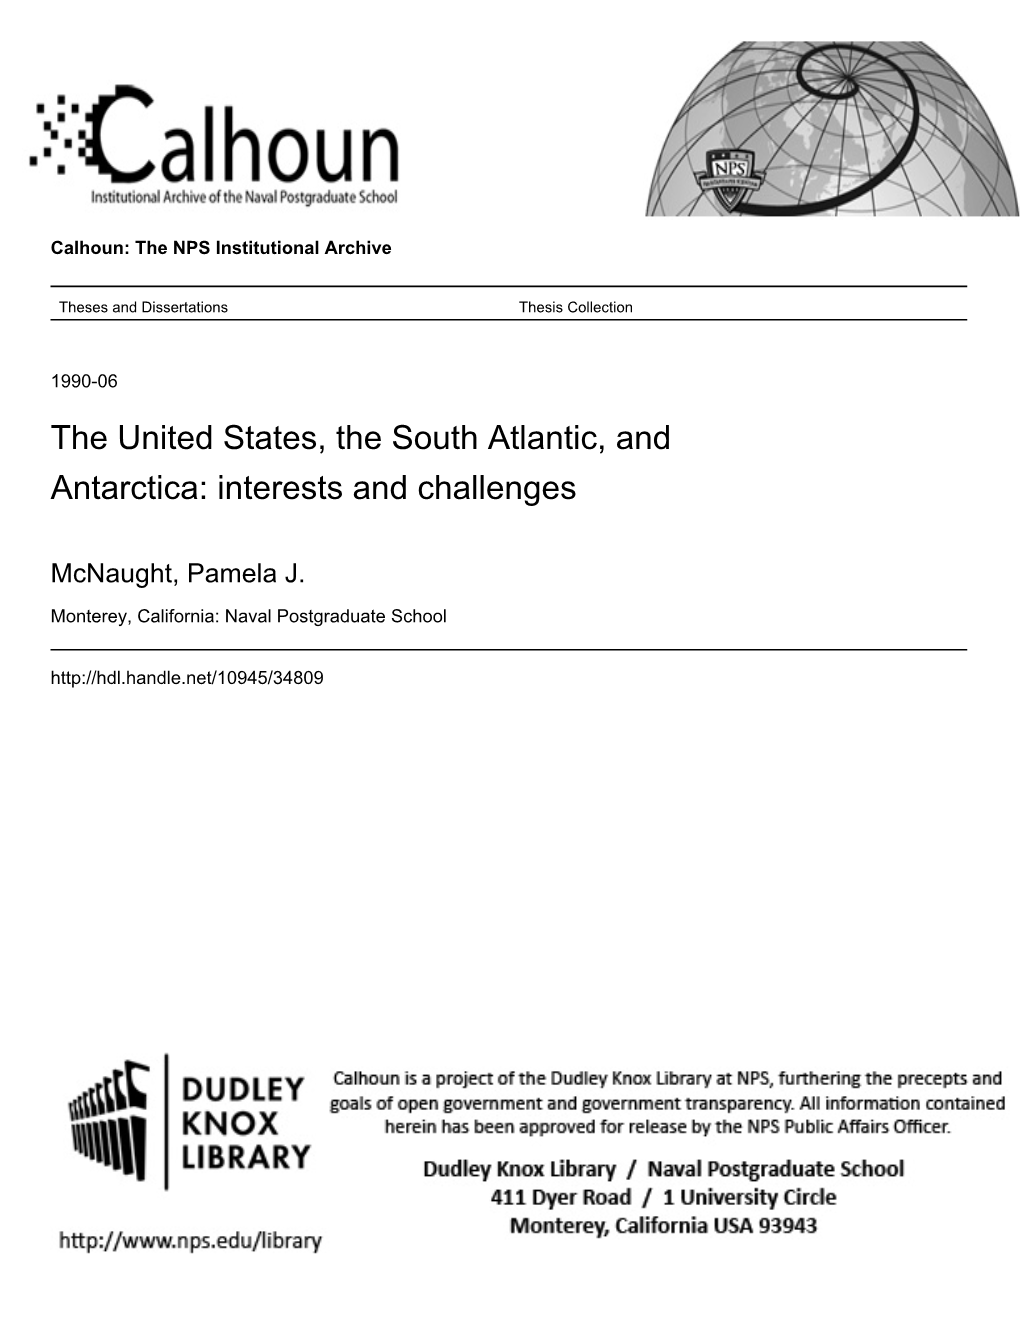 The United States, the South Atlantic, and Antarctica: Interests and Challenges